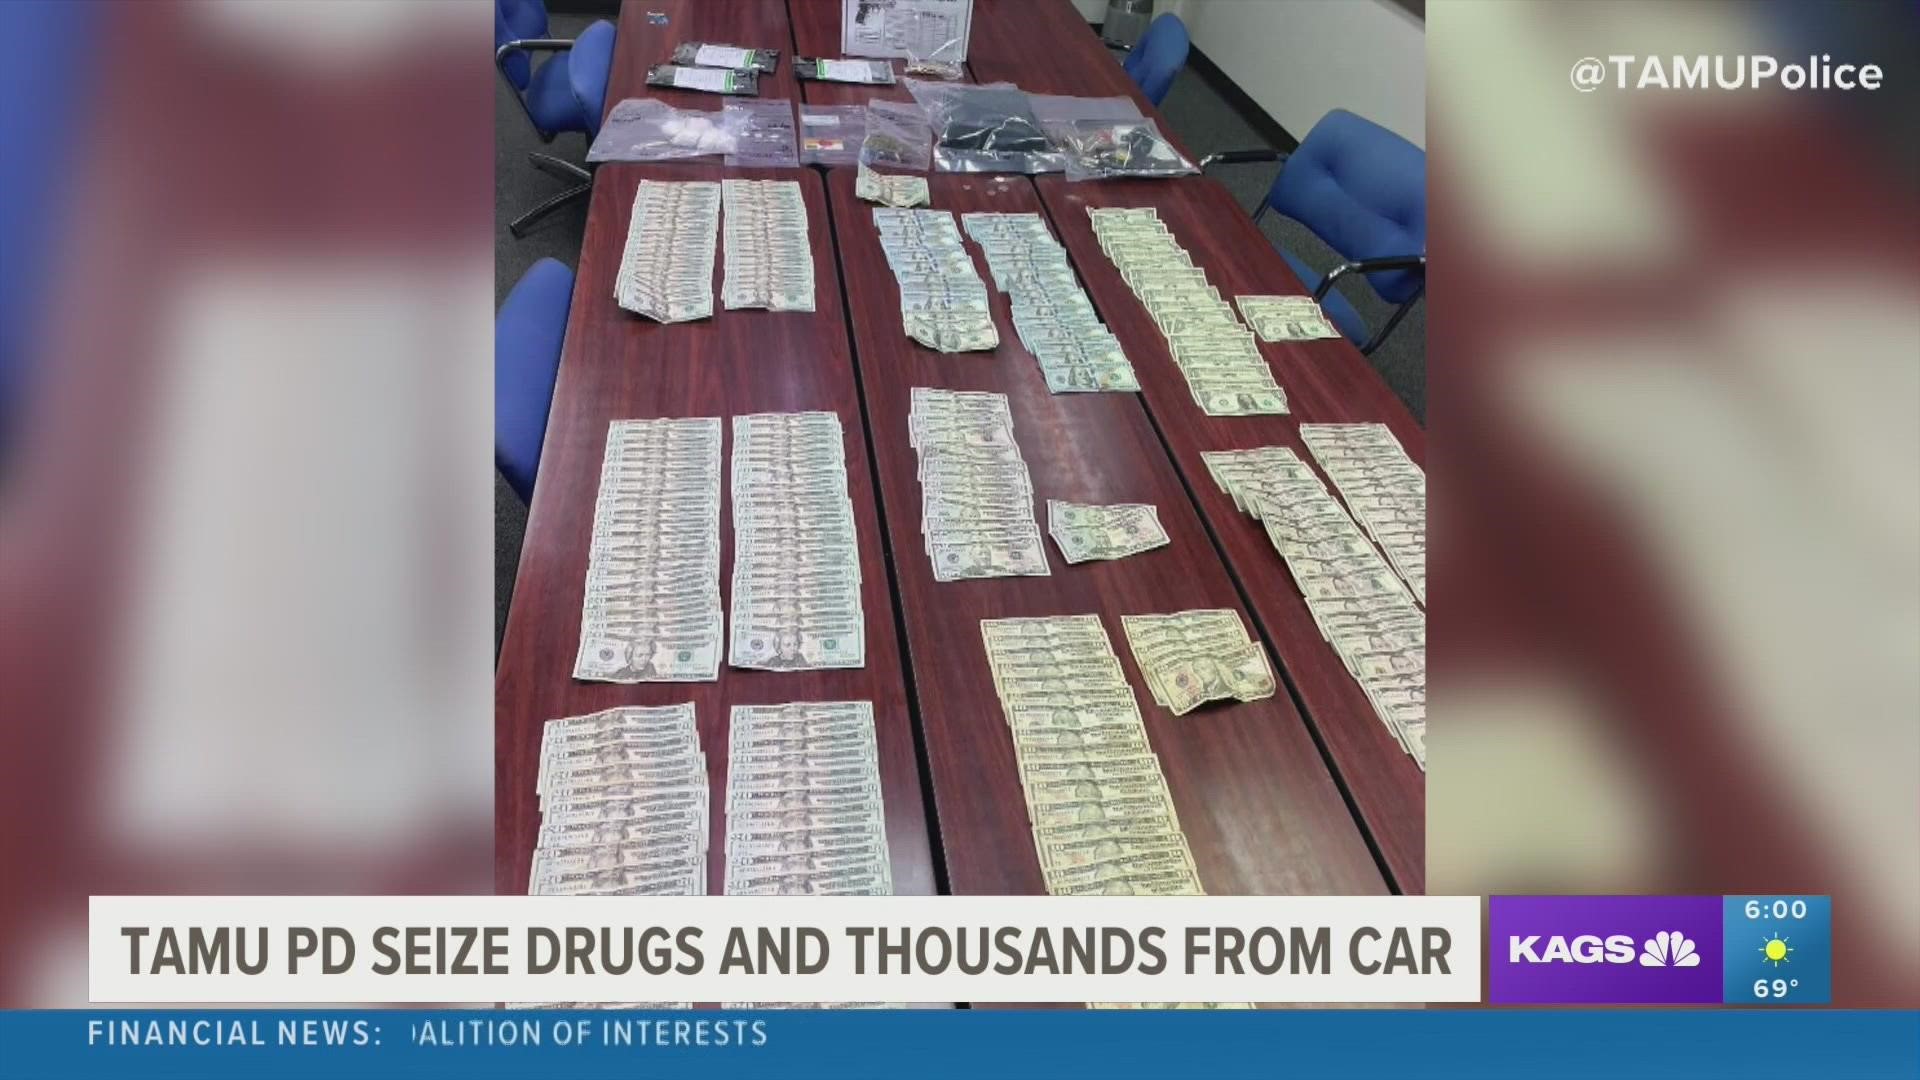 A Twitter post from the TAMU Police Department shows a shocking image of the seizure.